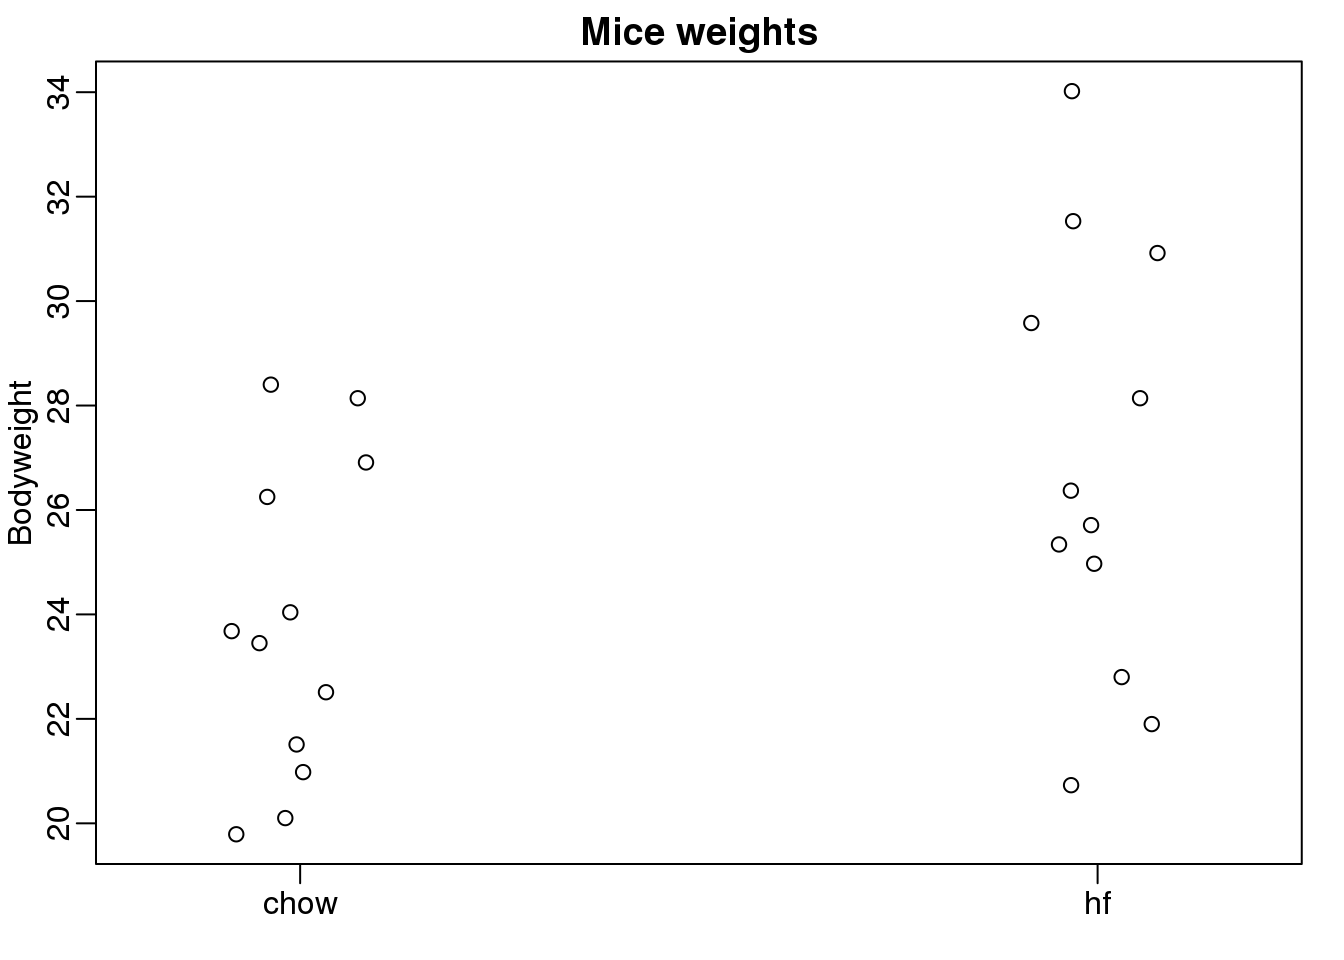 Mouse weights under two diets.